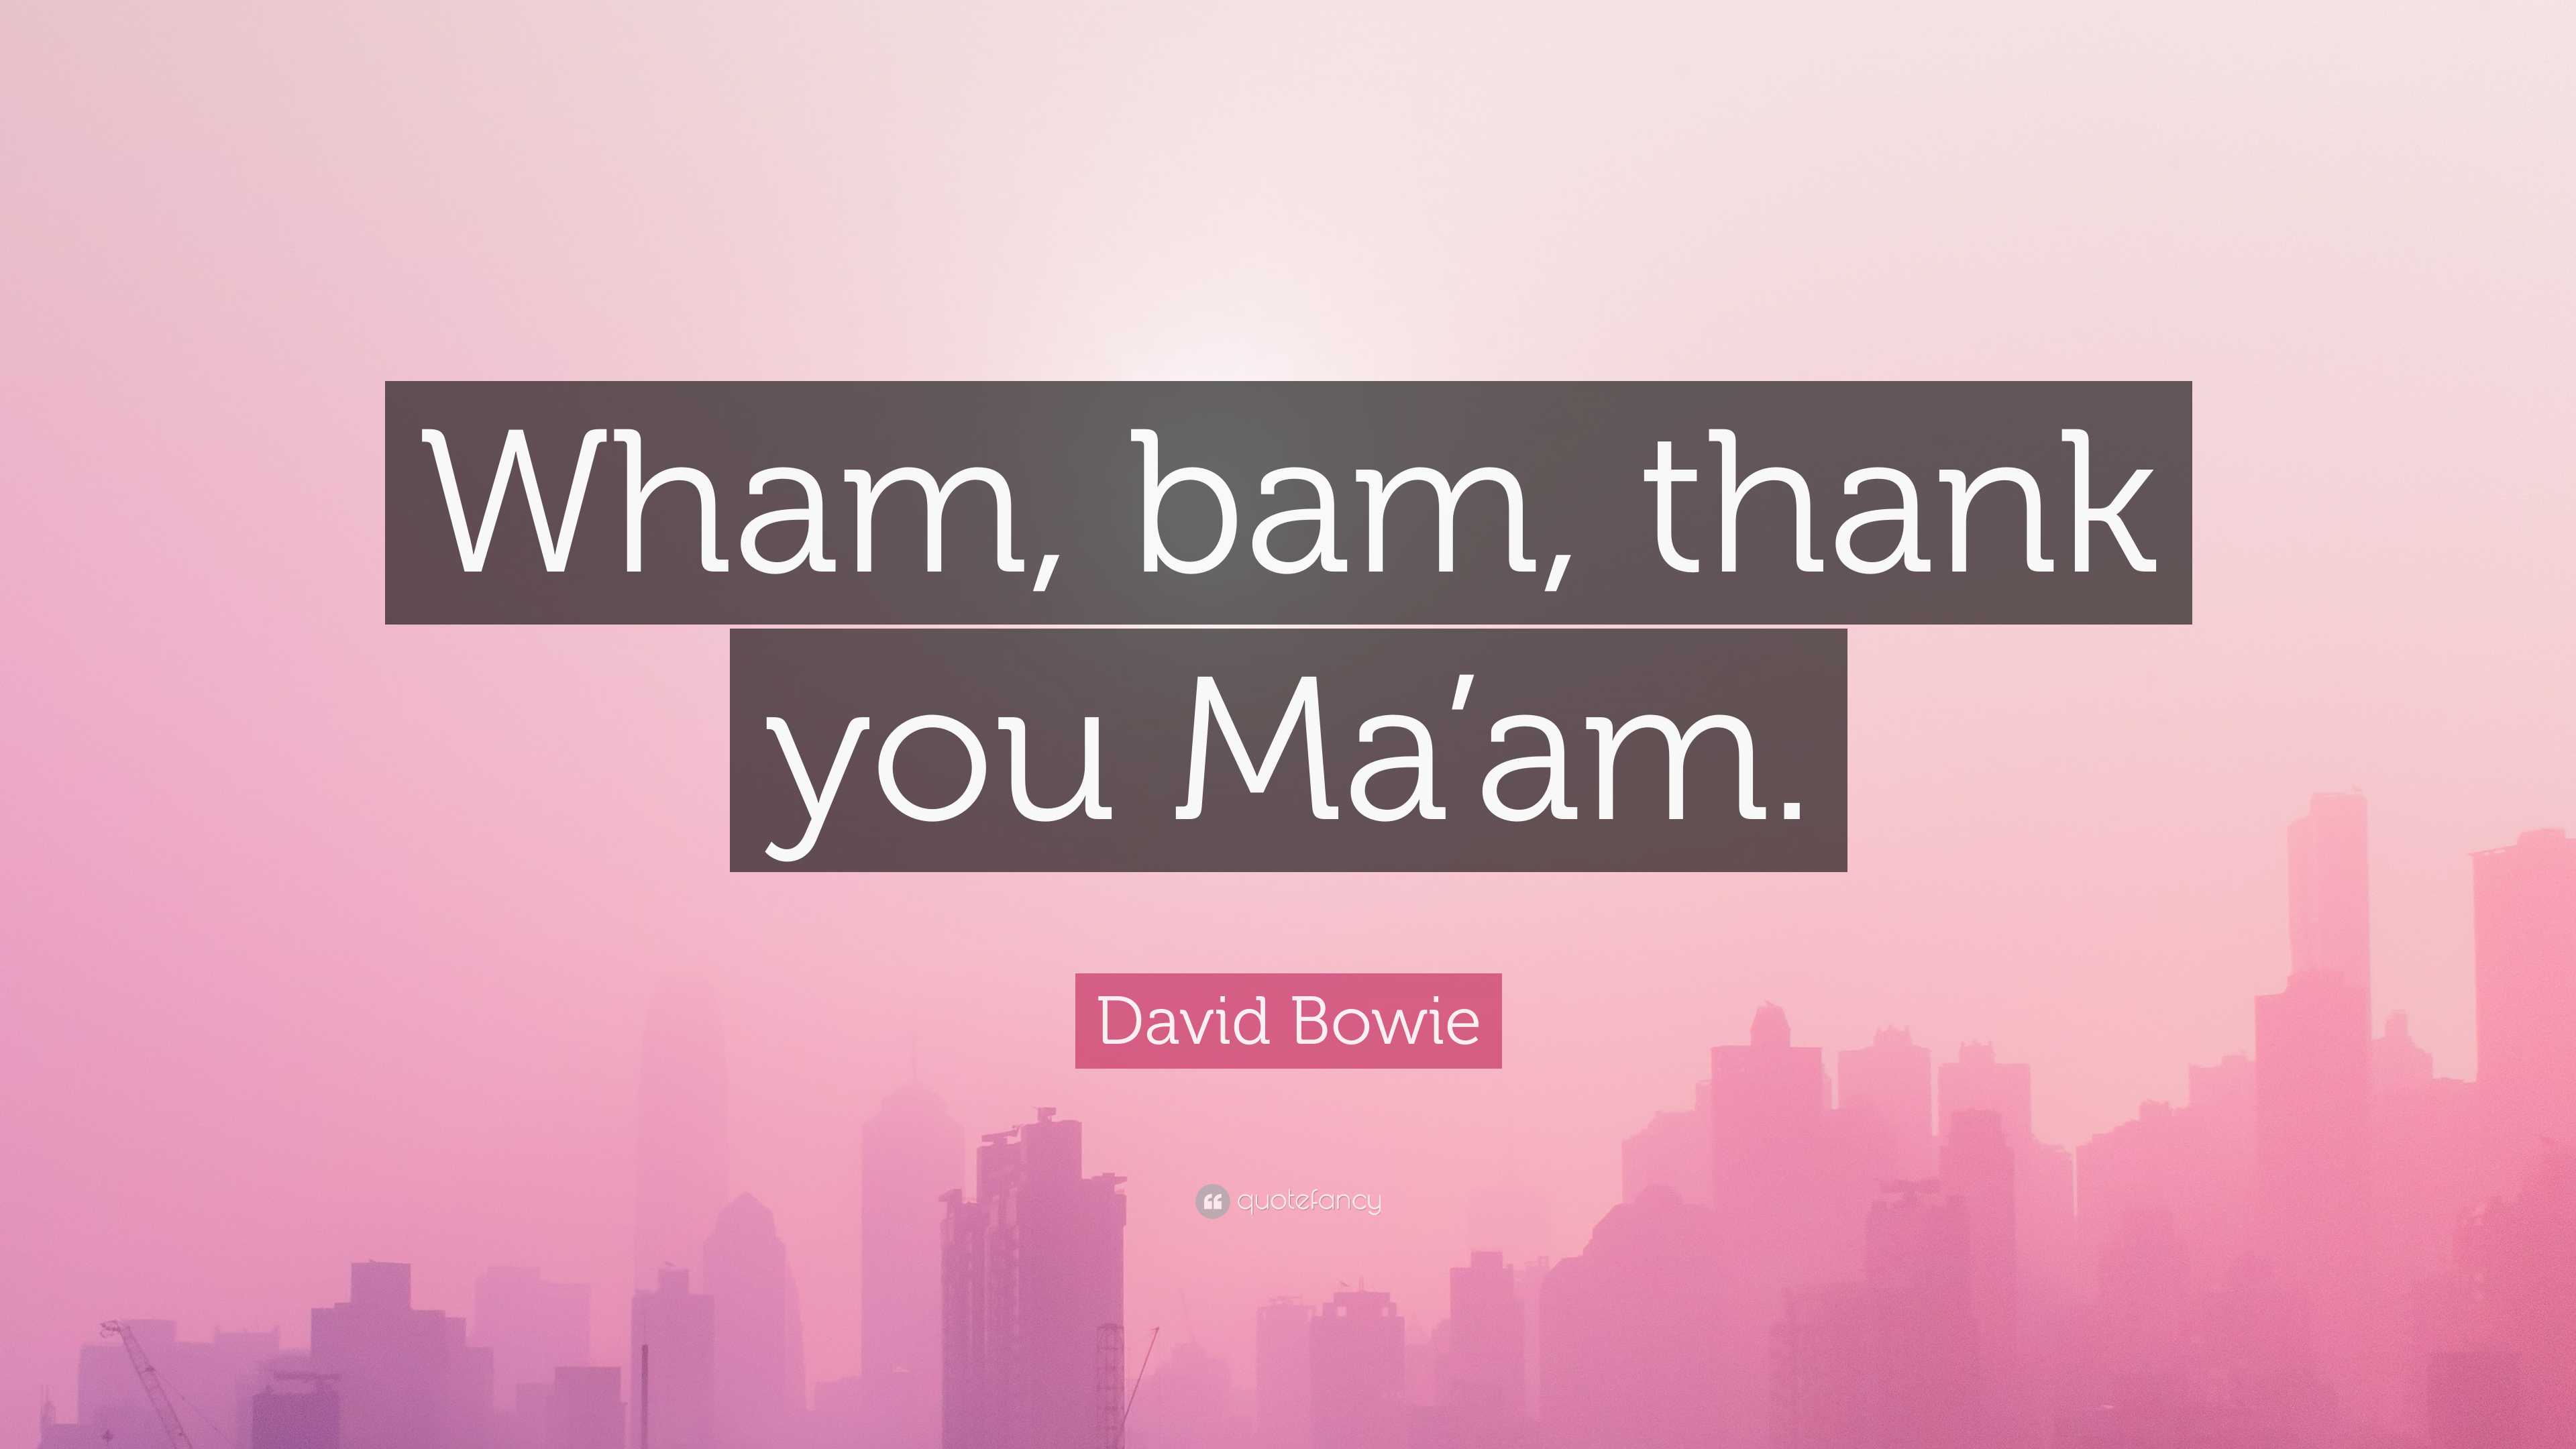 David Bowie Quote “wham Bam Thank You Maam” 6999